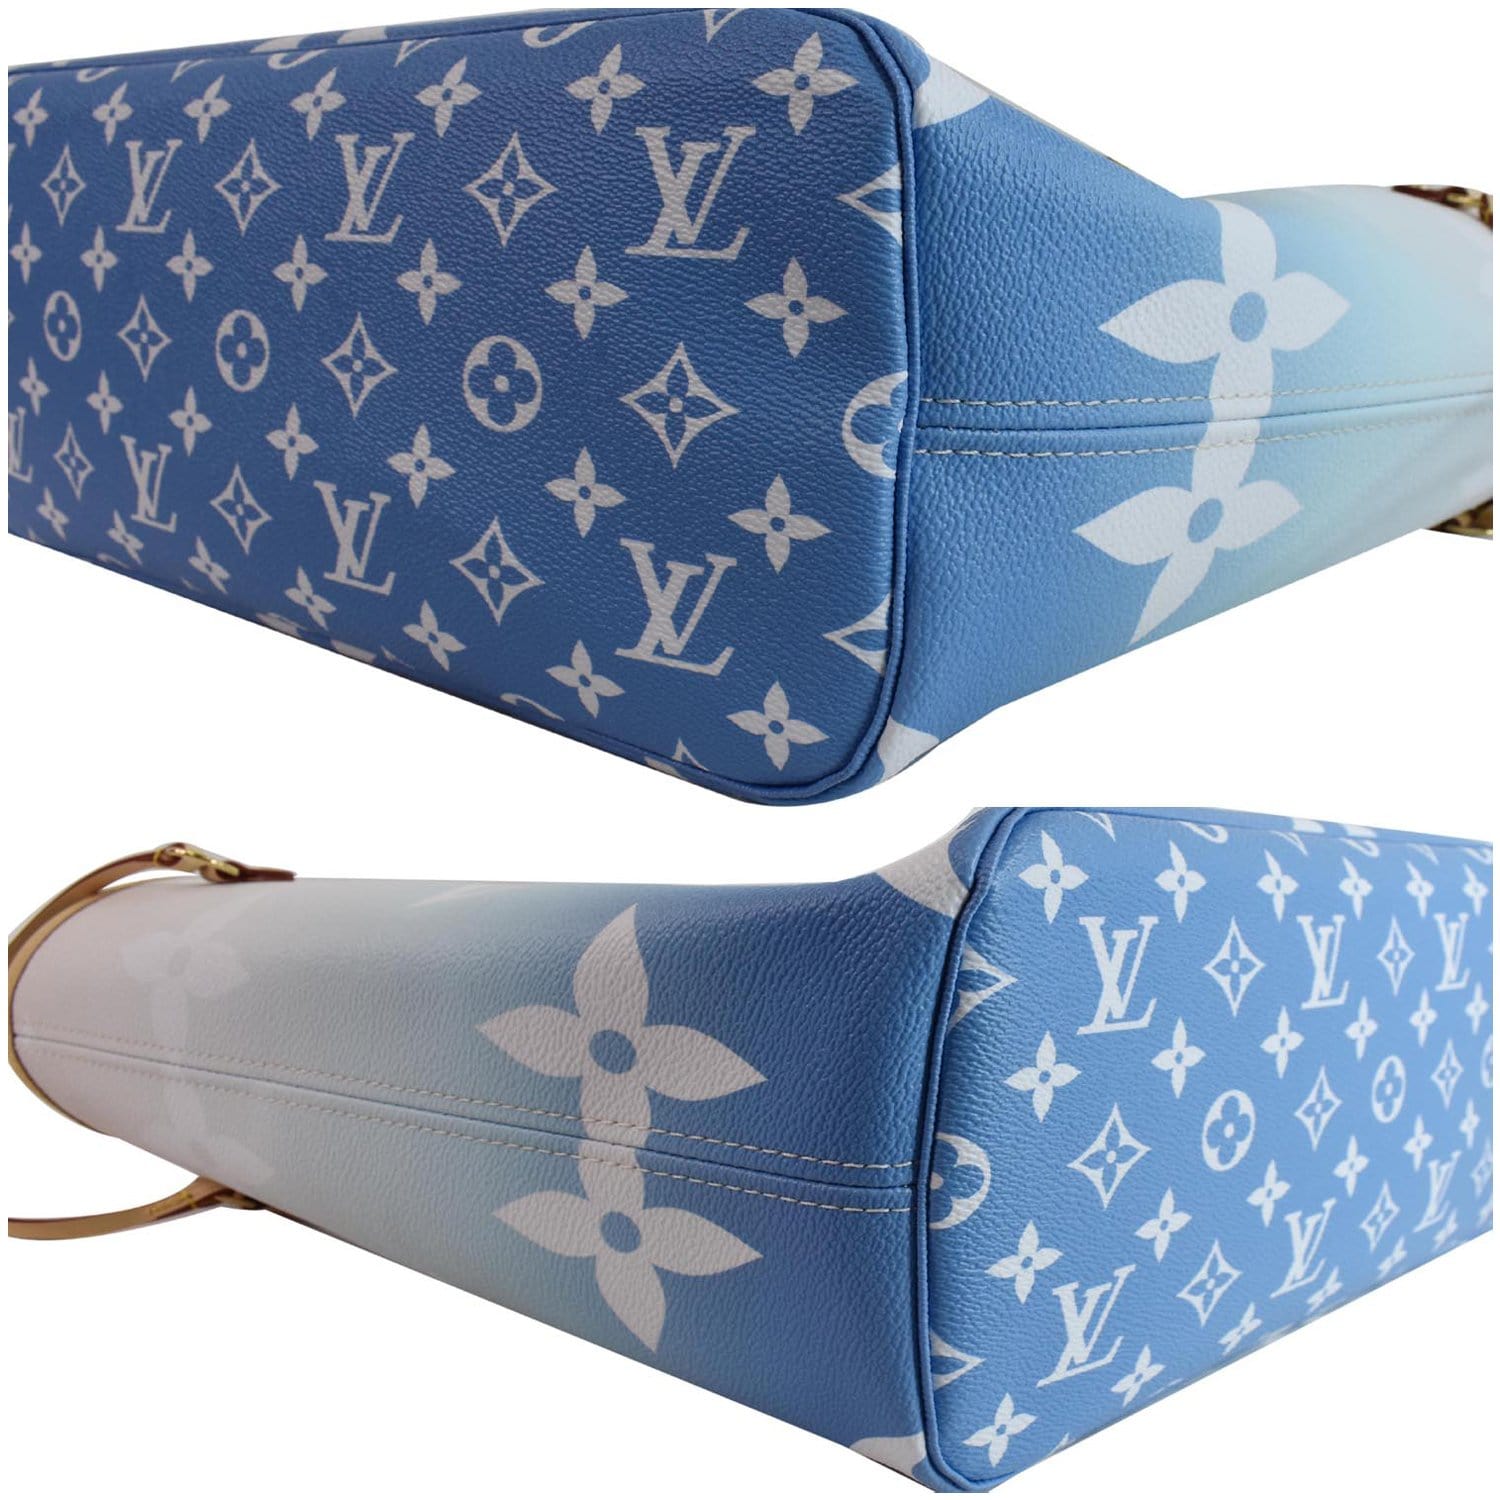 Louis Vuitton Giant Monogram Canvas By The Pool Neverfull MM Tote